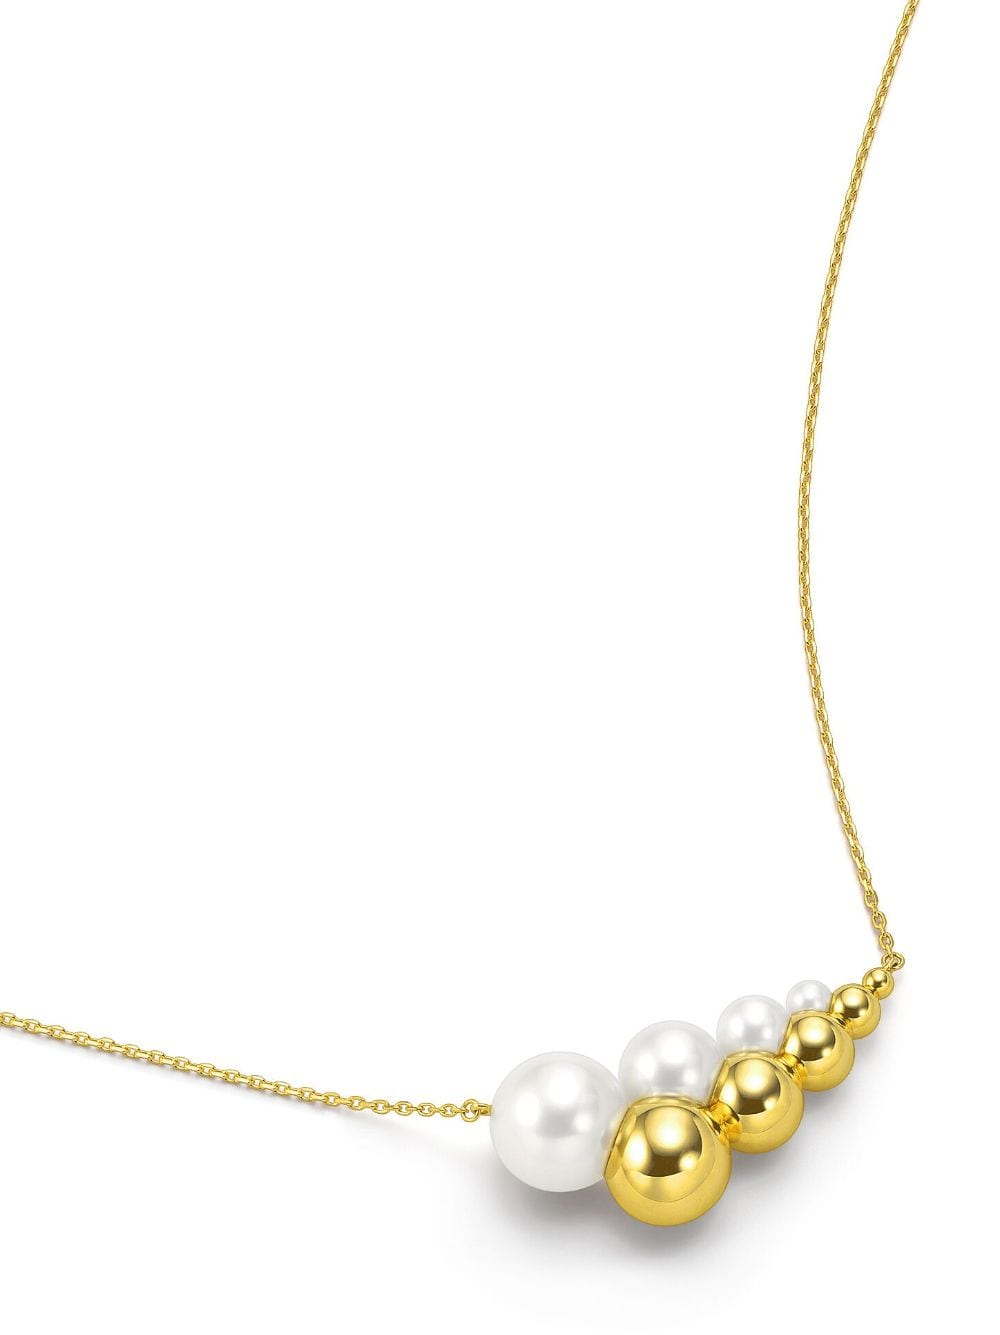 Shop Tasaki 18kt Yellow Gold M/g  Reflected Freshwater Pearl Necklace